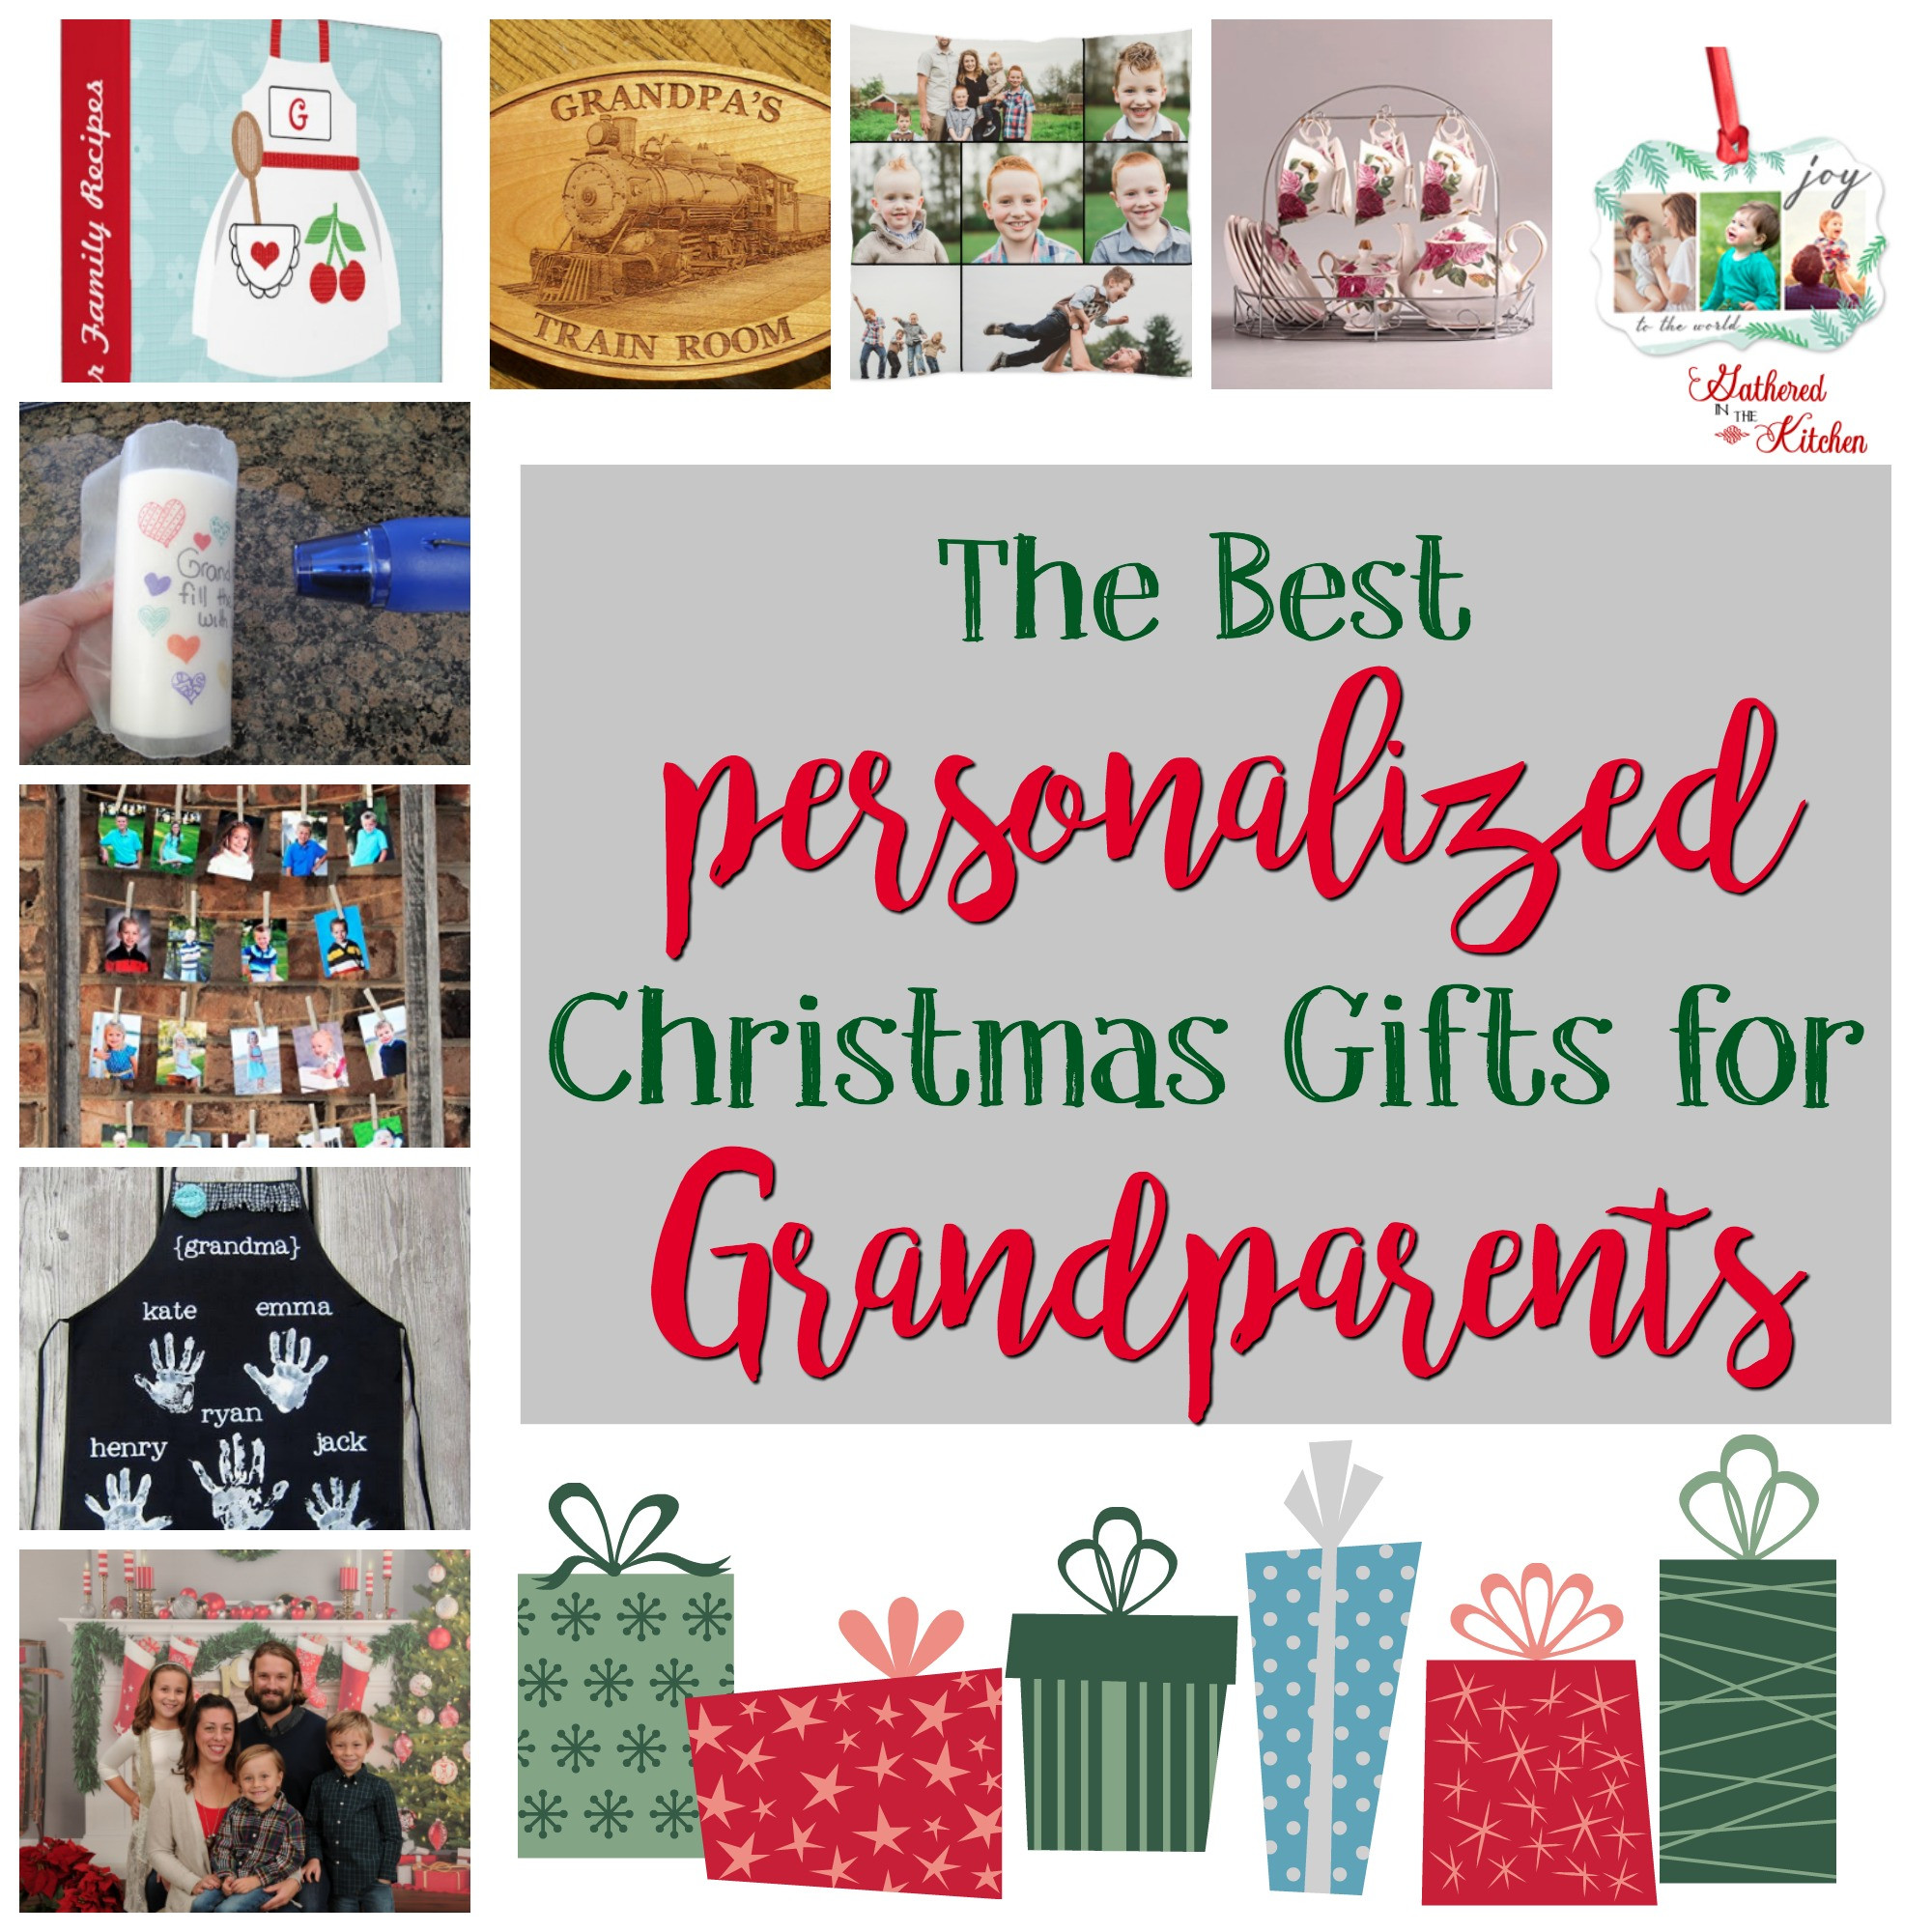 Christmas Gift Ideas For Grandparents
 Personalized Holiday Gifts for Grandparents Gathered In